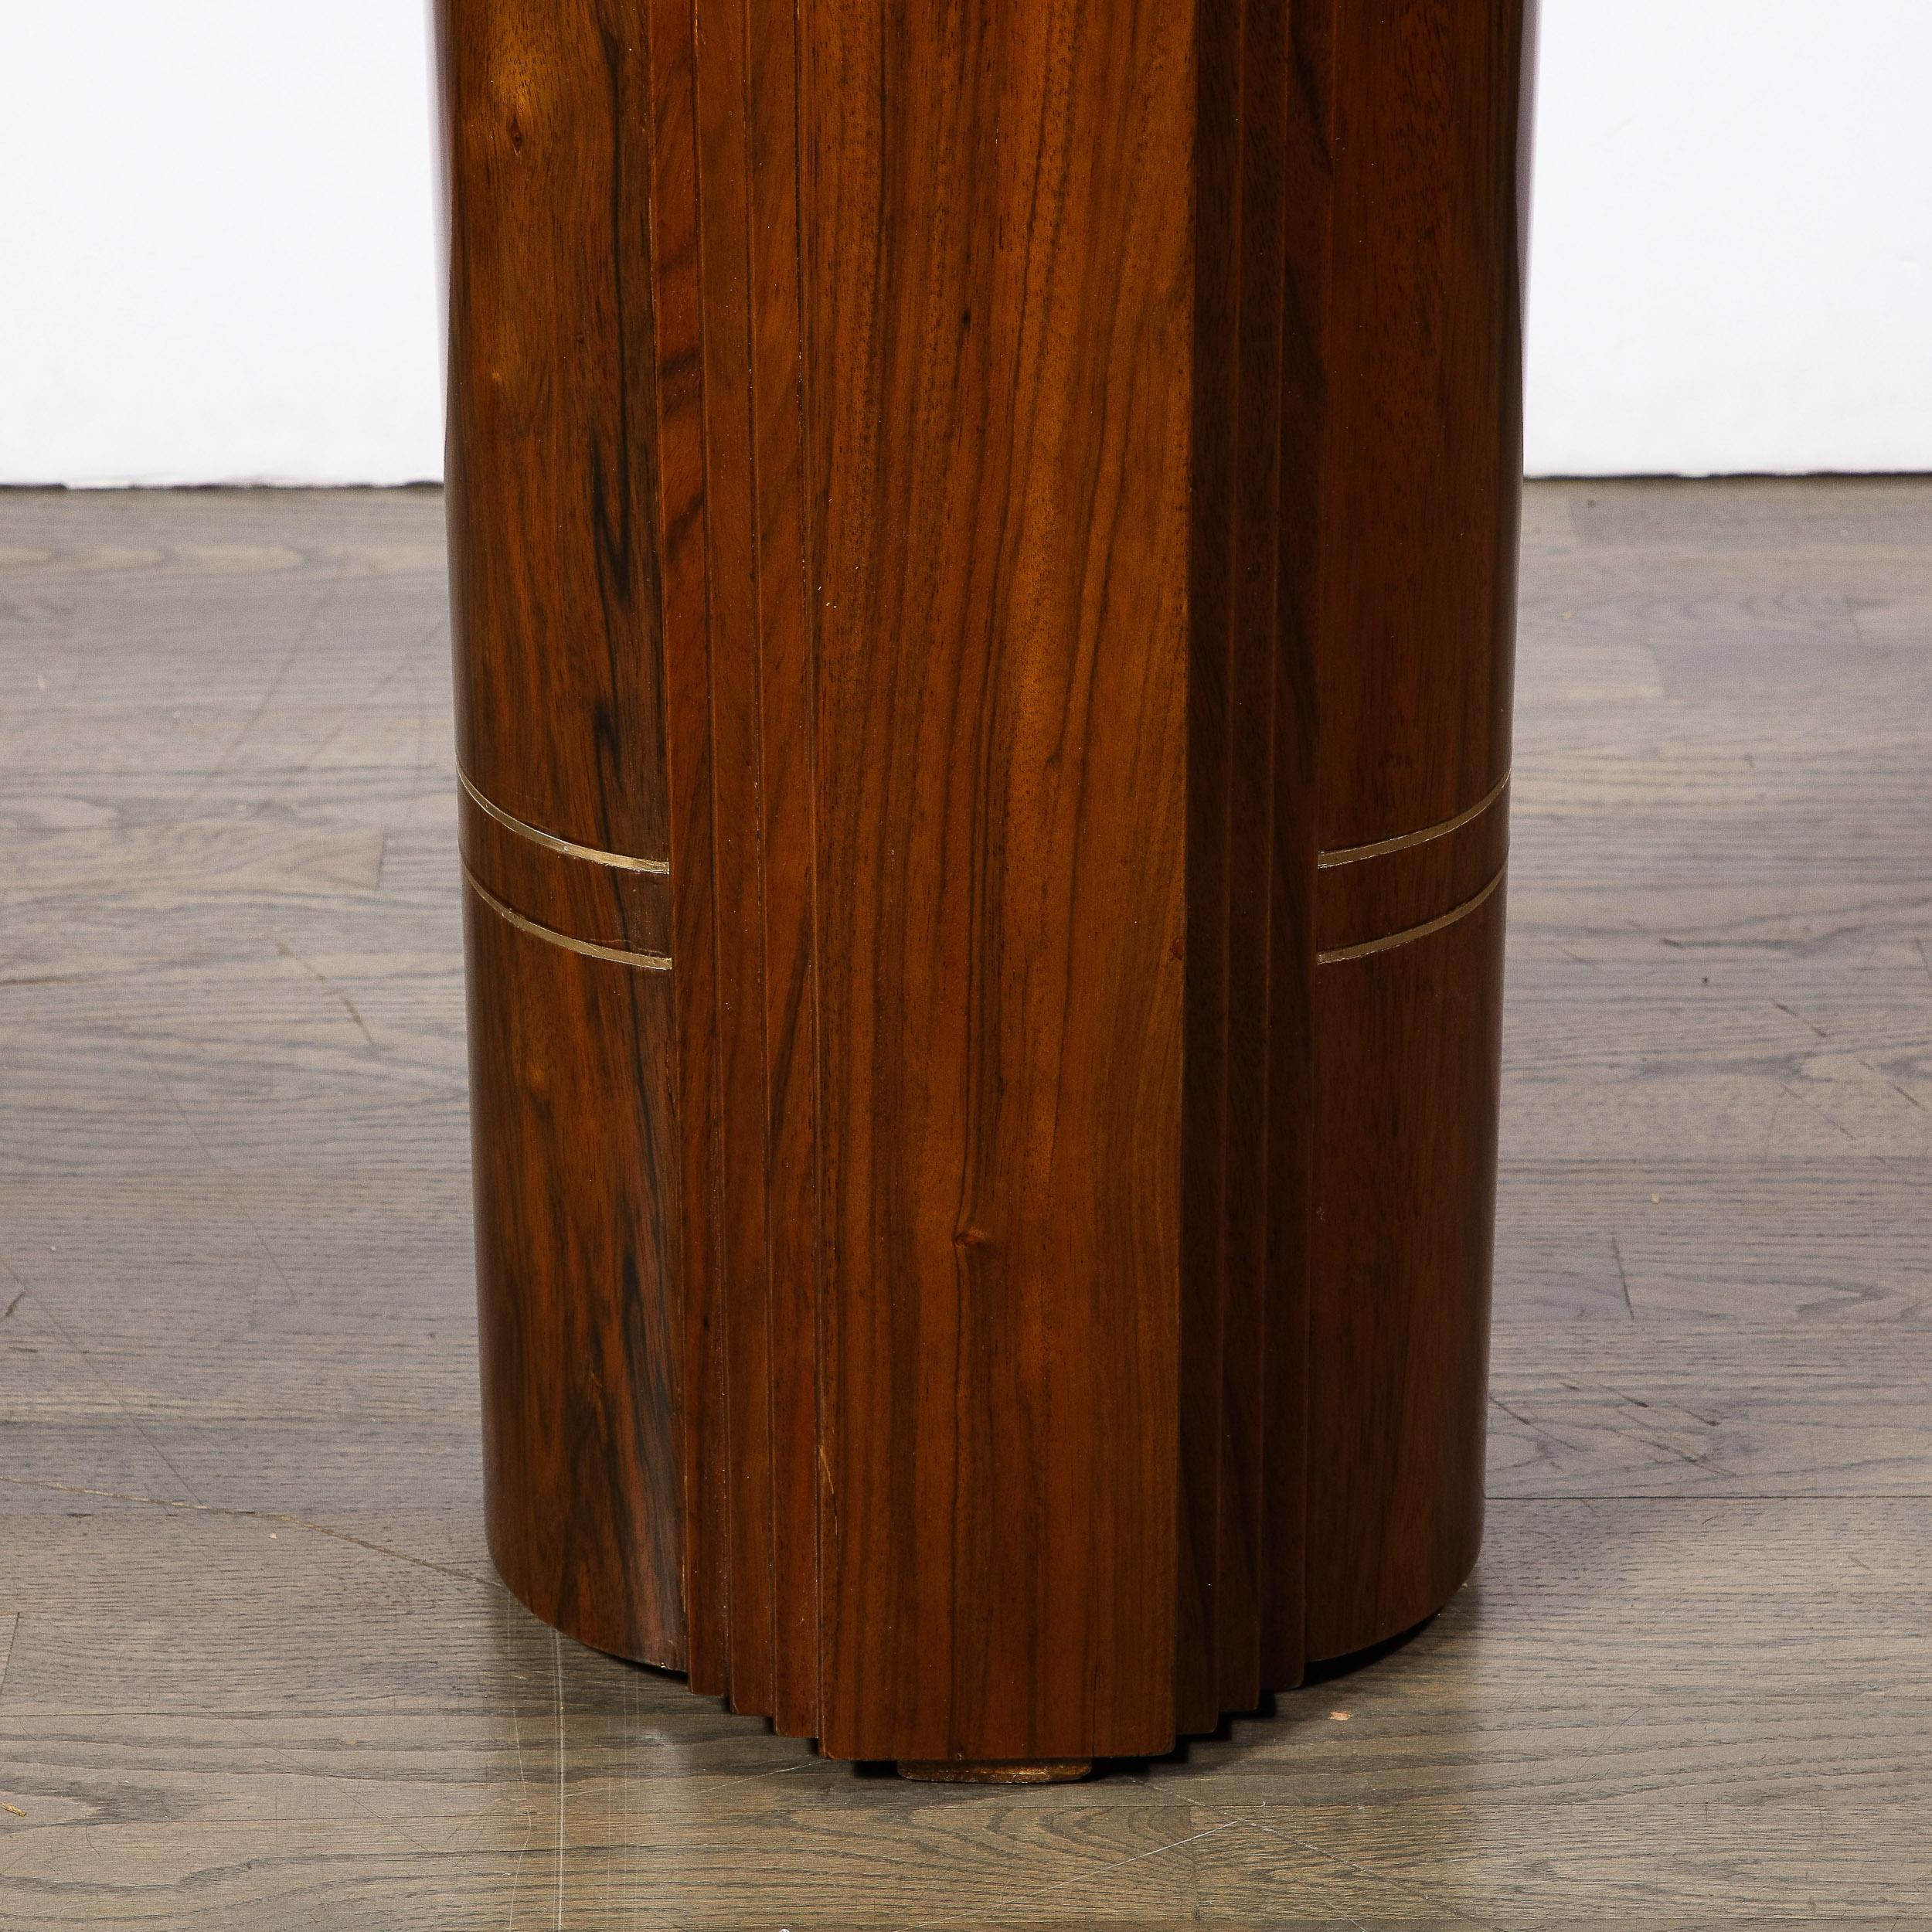 Art Deco Skyscraper Hand-rubbed Book-matched Walnut Pedestal w/ Brass Inlays For Sale 4